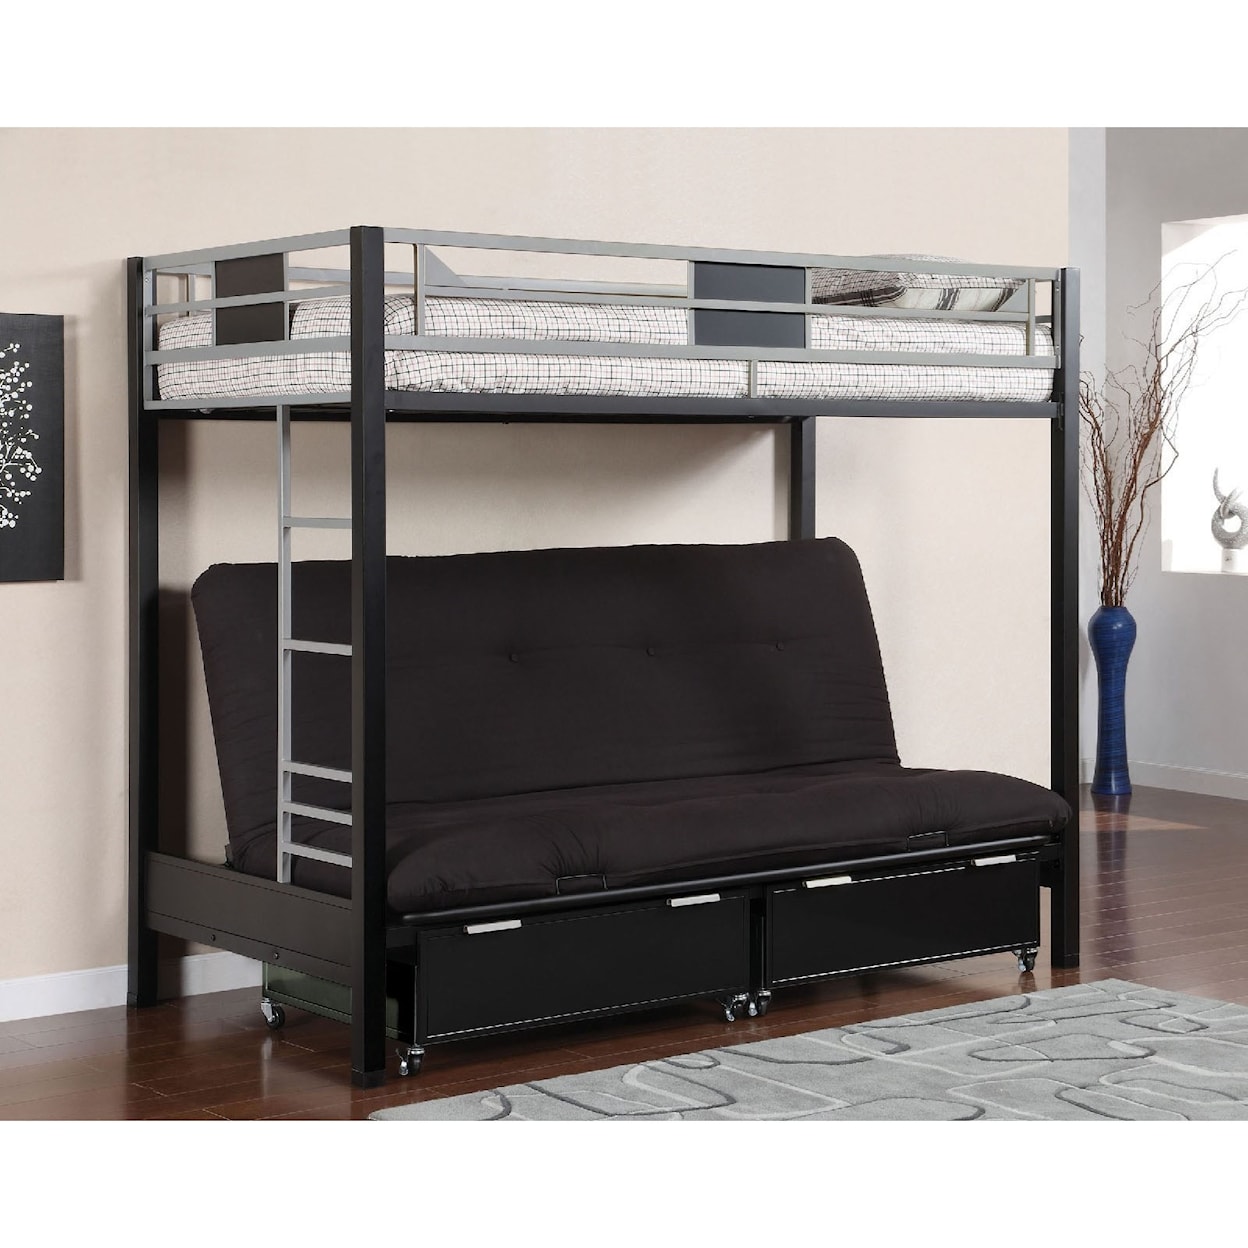 FUSA Clifton Twin Loft Bed with Futon Base